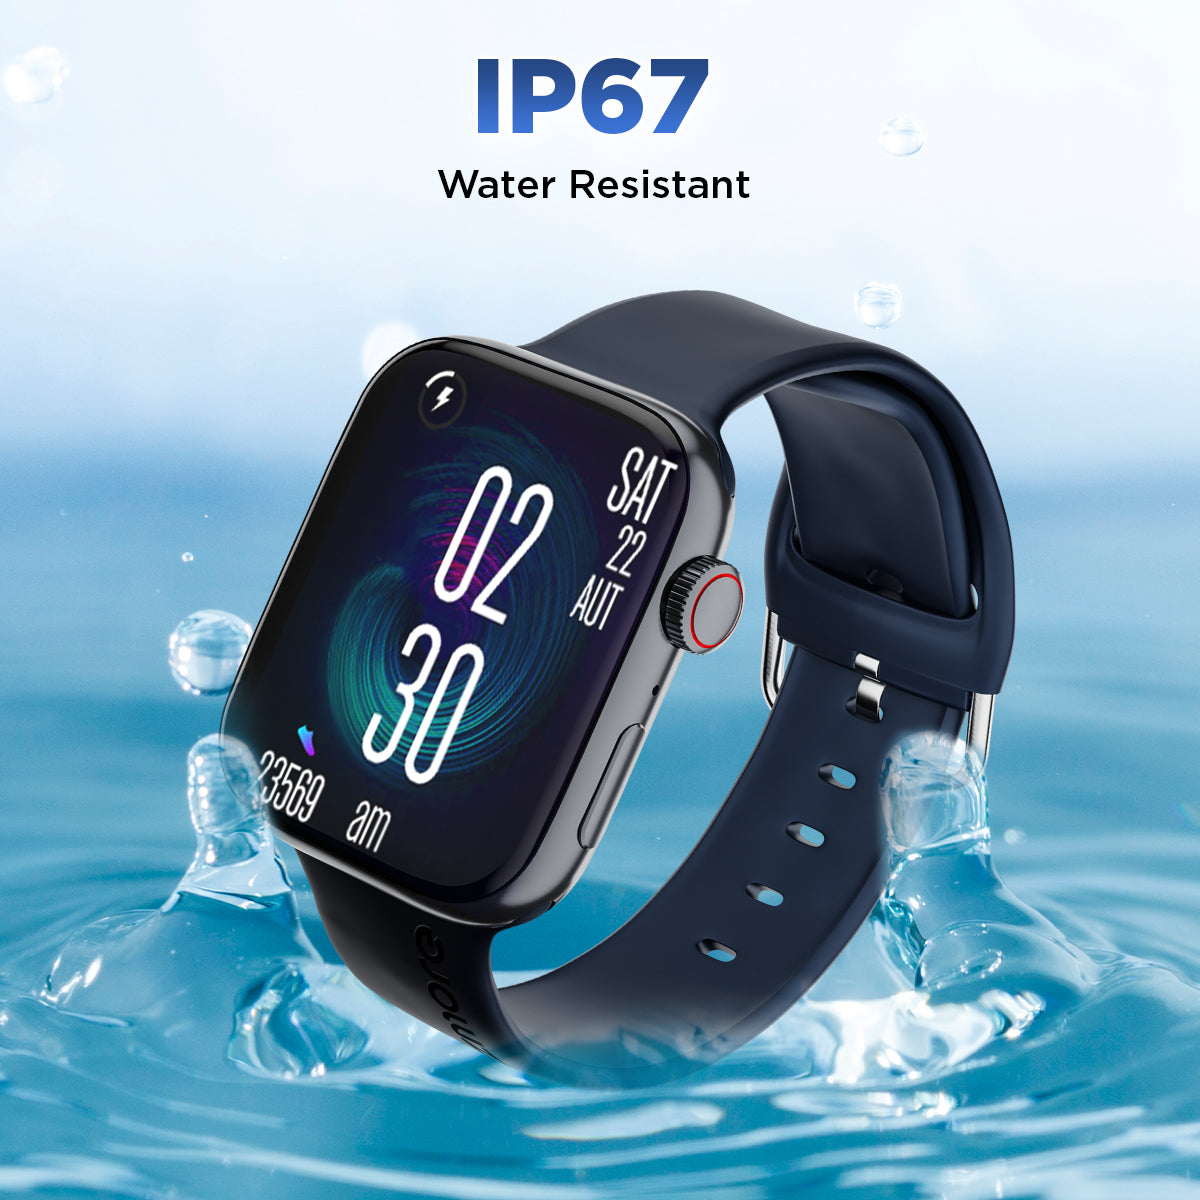 GIZMORE Cloud 1.85(4.69) cm IPS Large Display | AI Voice Assistant | Privacy Lock | Multiple Sport Modes| Bluetooth Calling Smartwatch